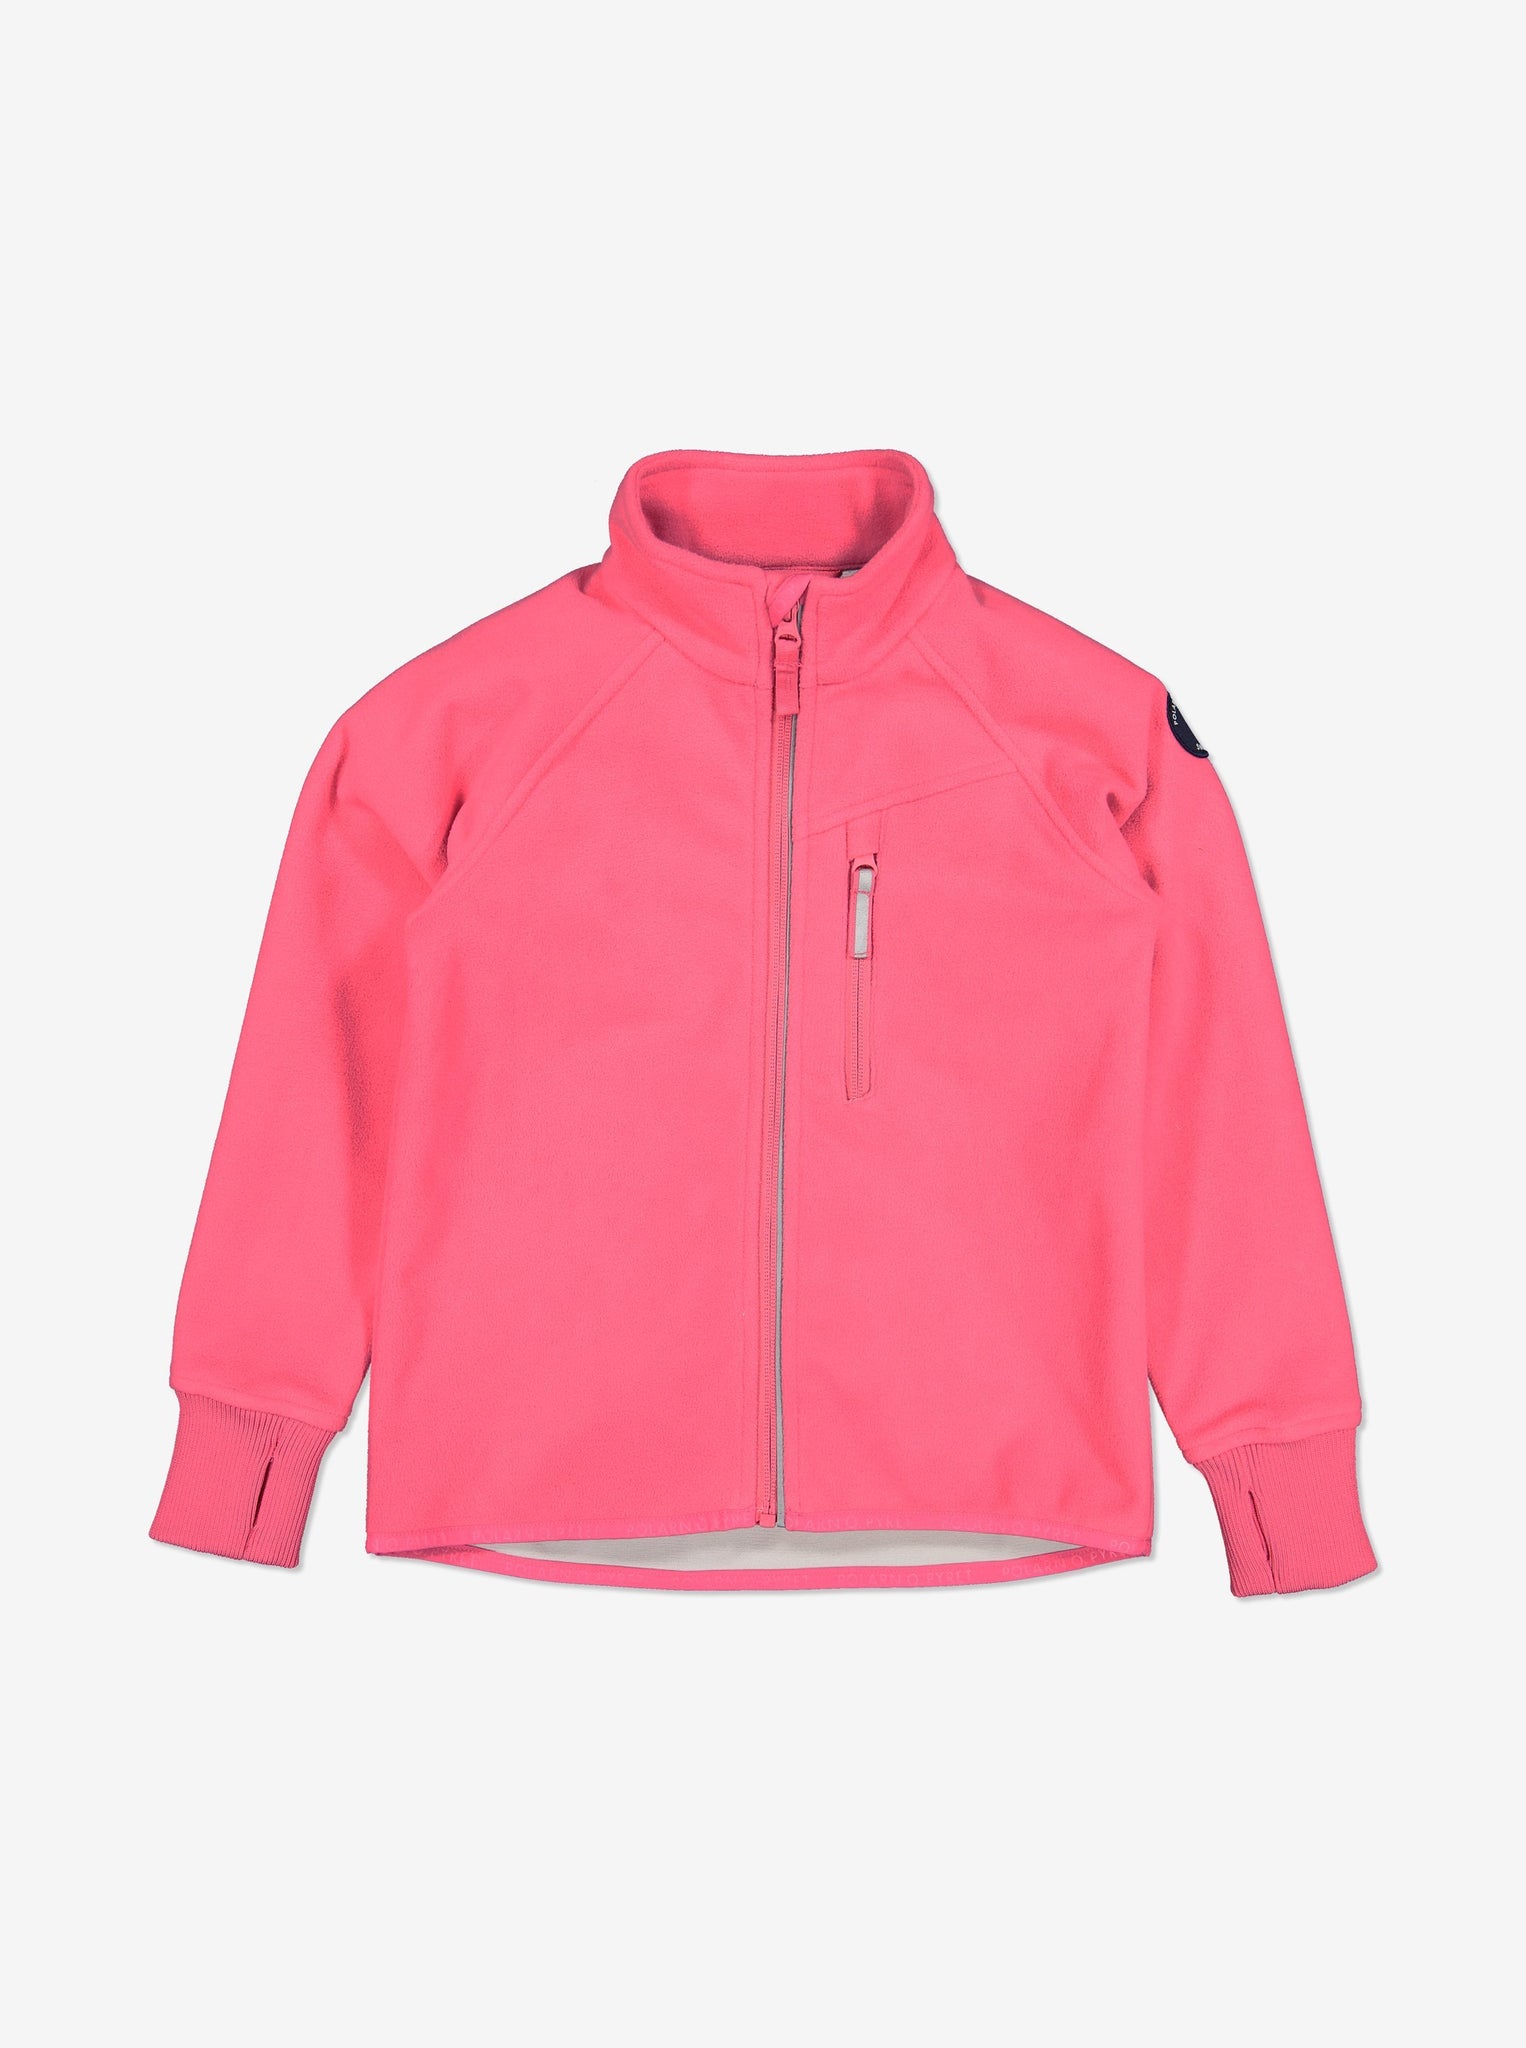 Keep your little ones cosy as they adventure with our waterproof pink fleece jacket. Made from recycled bottles and available in ages 1-12 years. Shop today.